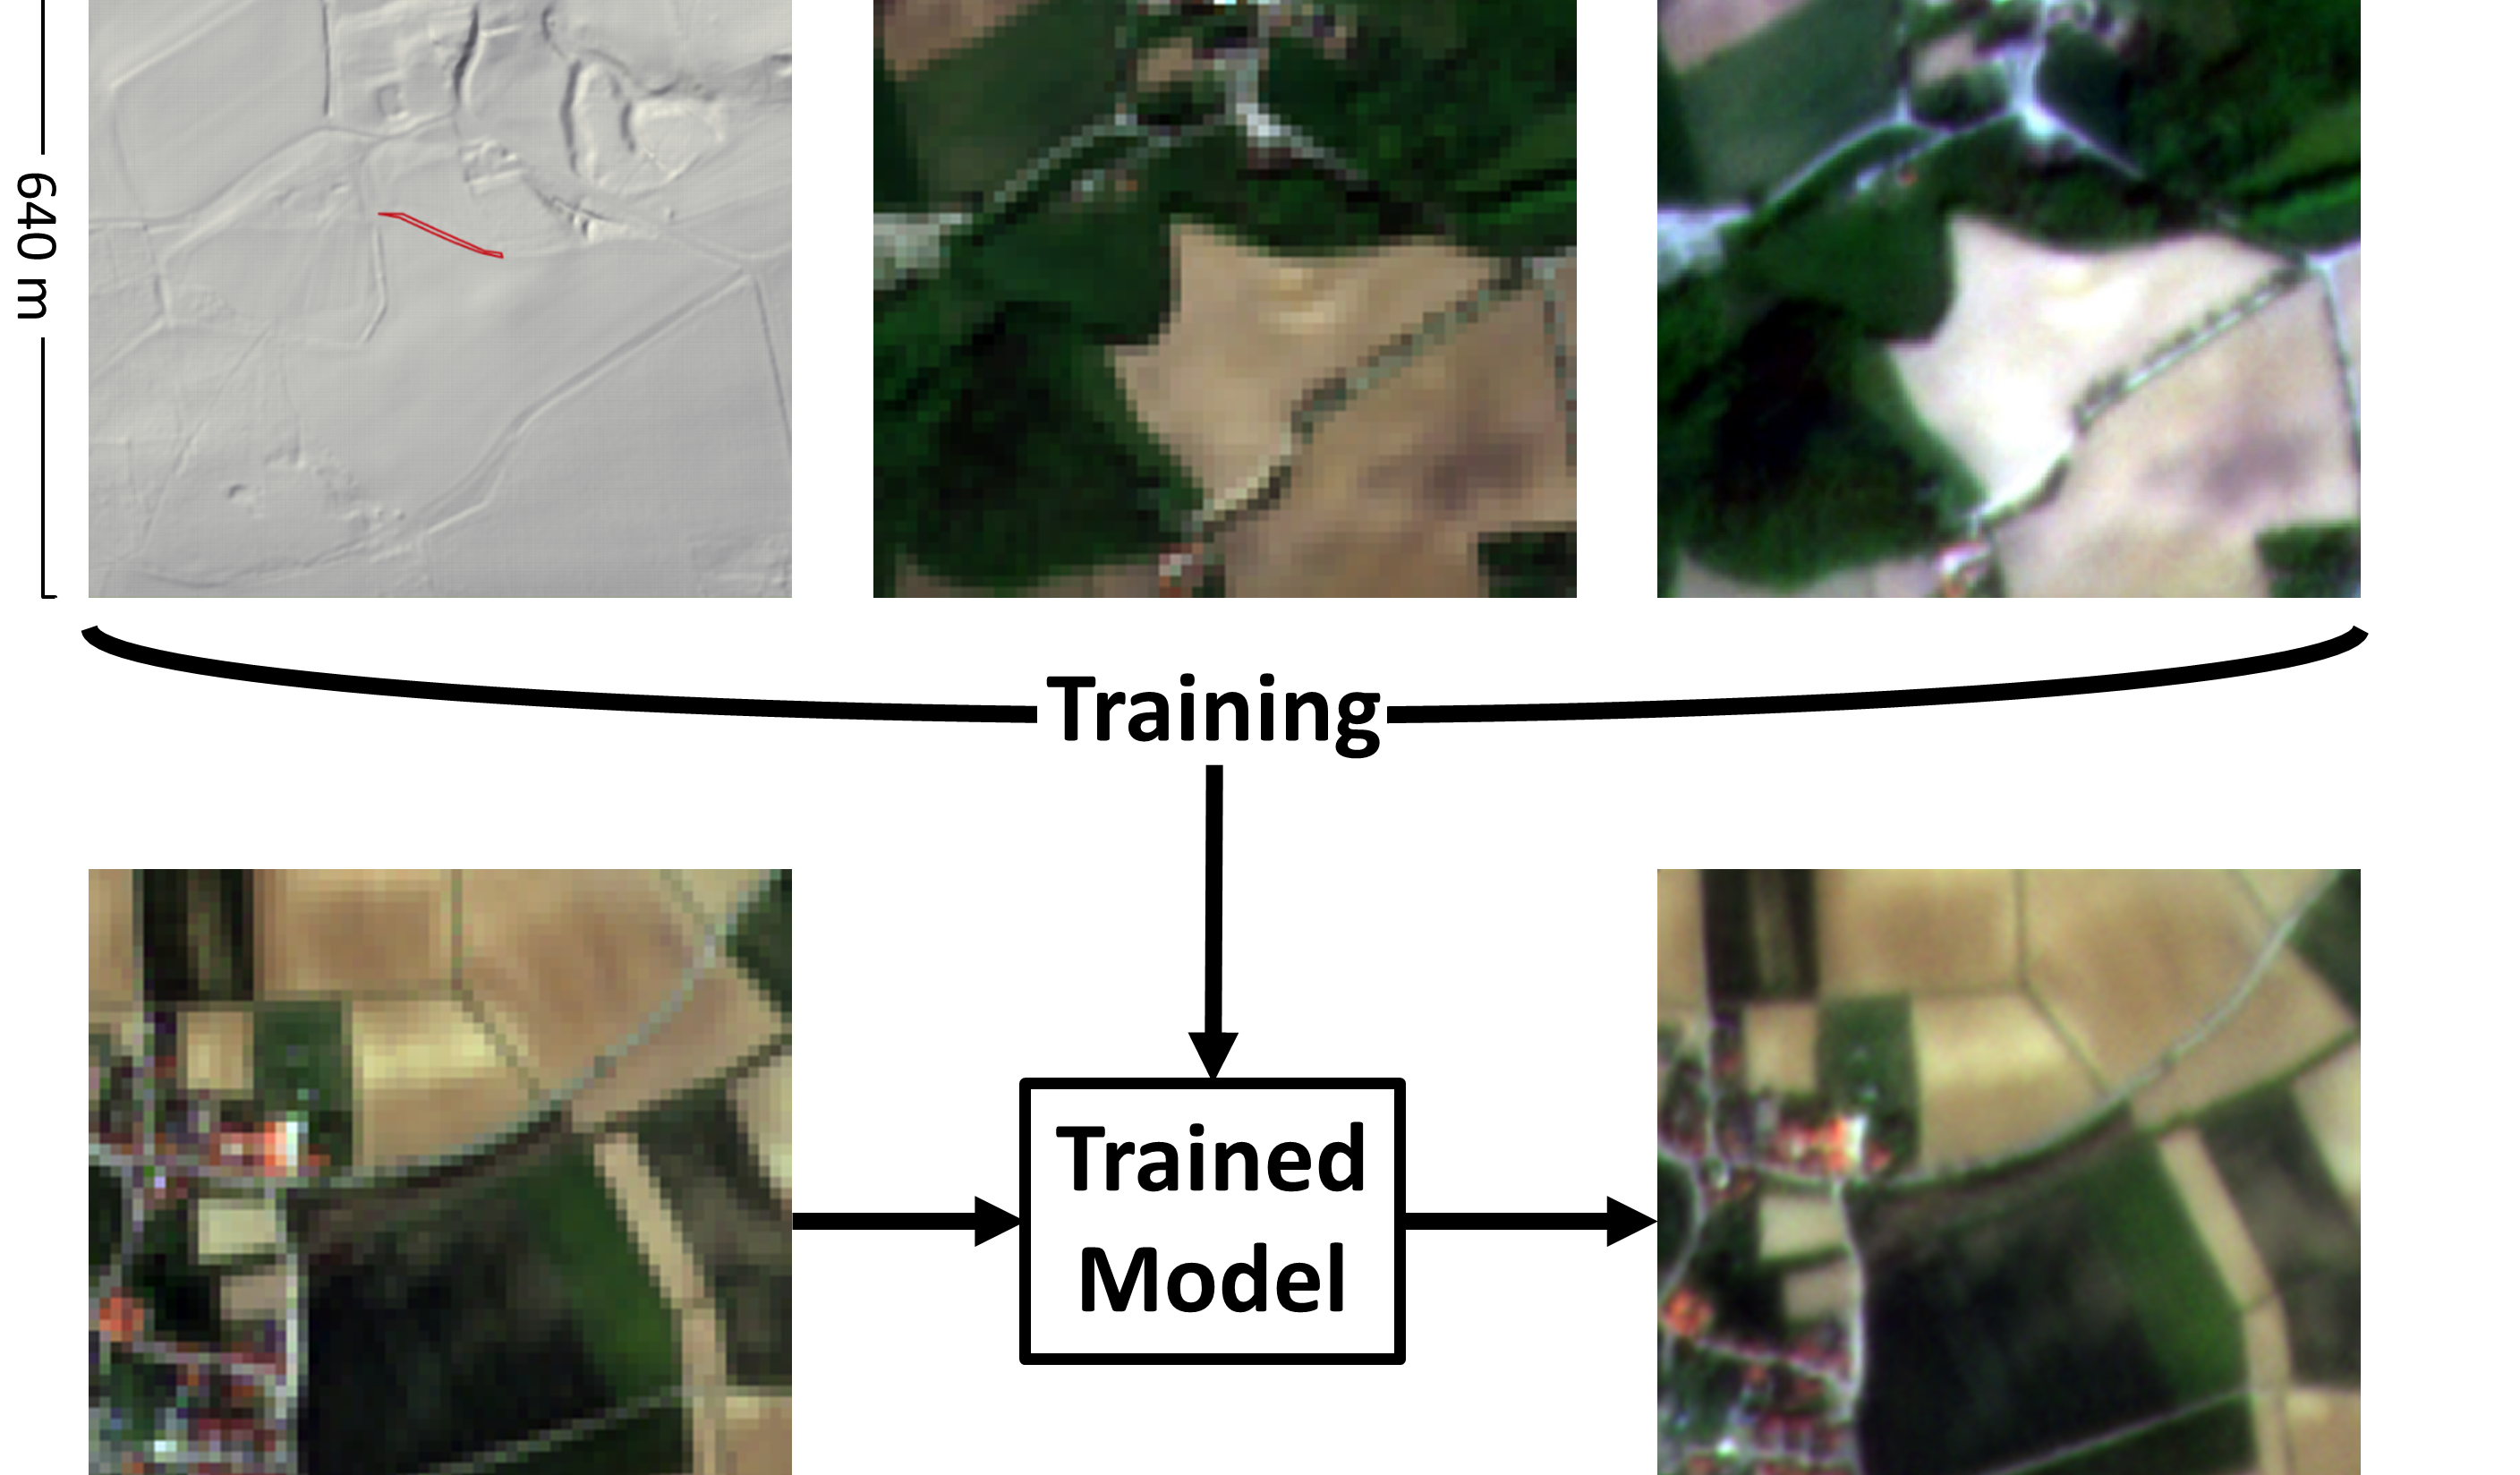 Scheme of workflow of SRR reconstruction, including multiple images of a plot of land